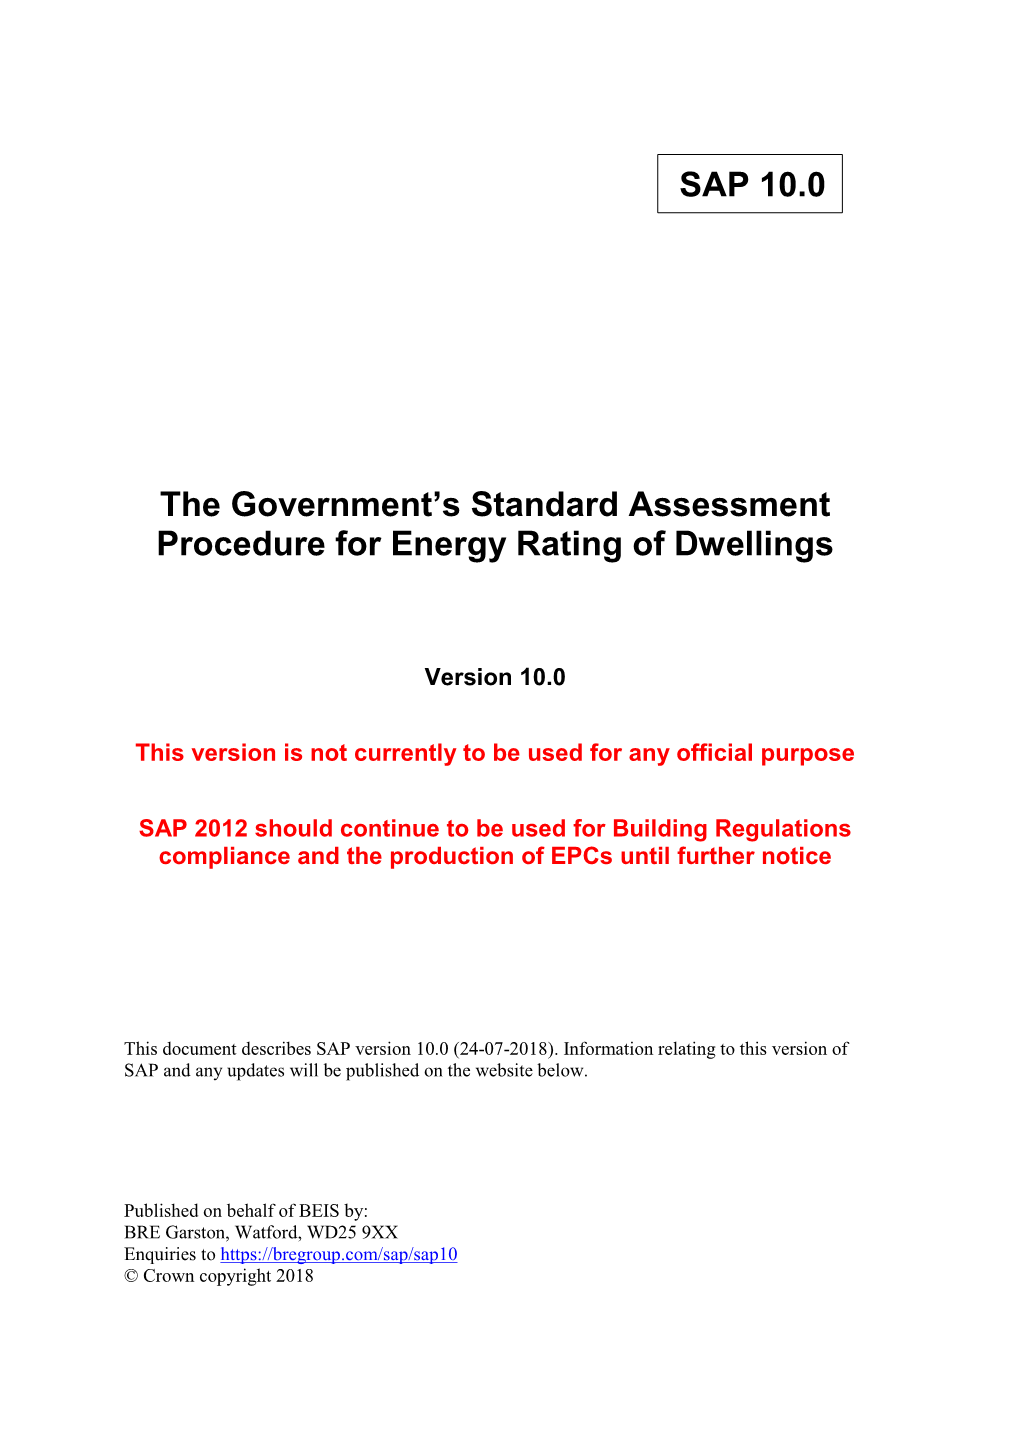 SAP 10.0 the Government's Standard Assessment Procedure for Energy